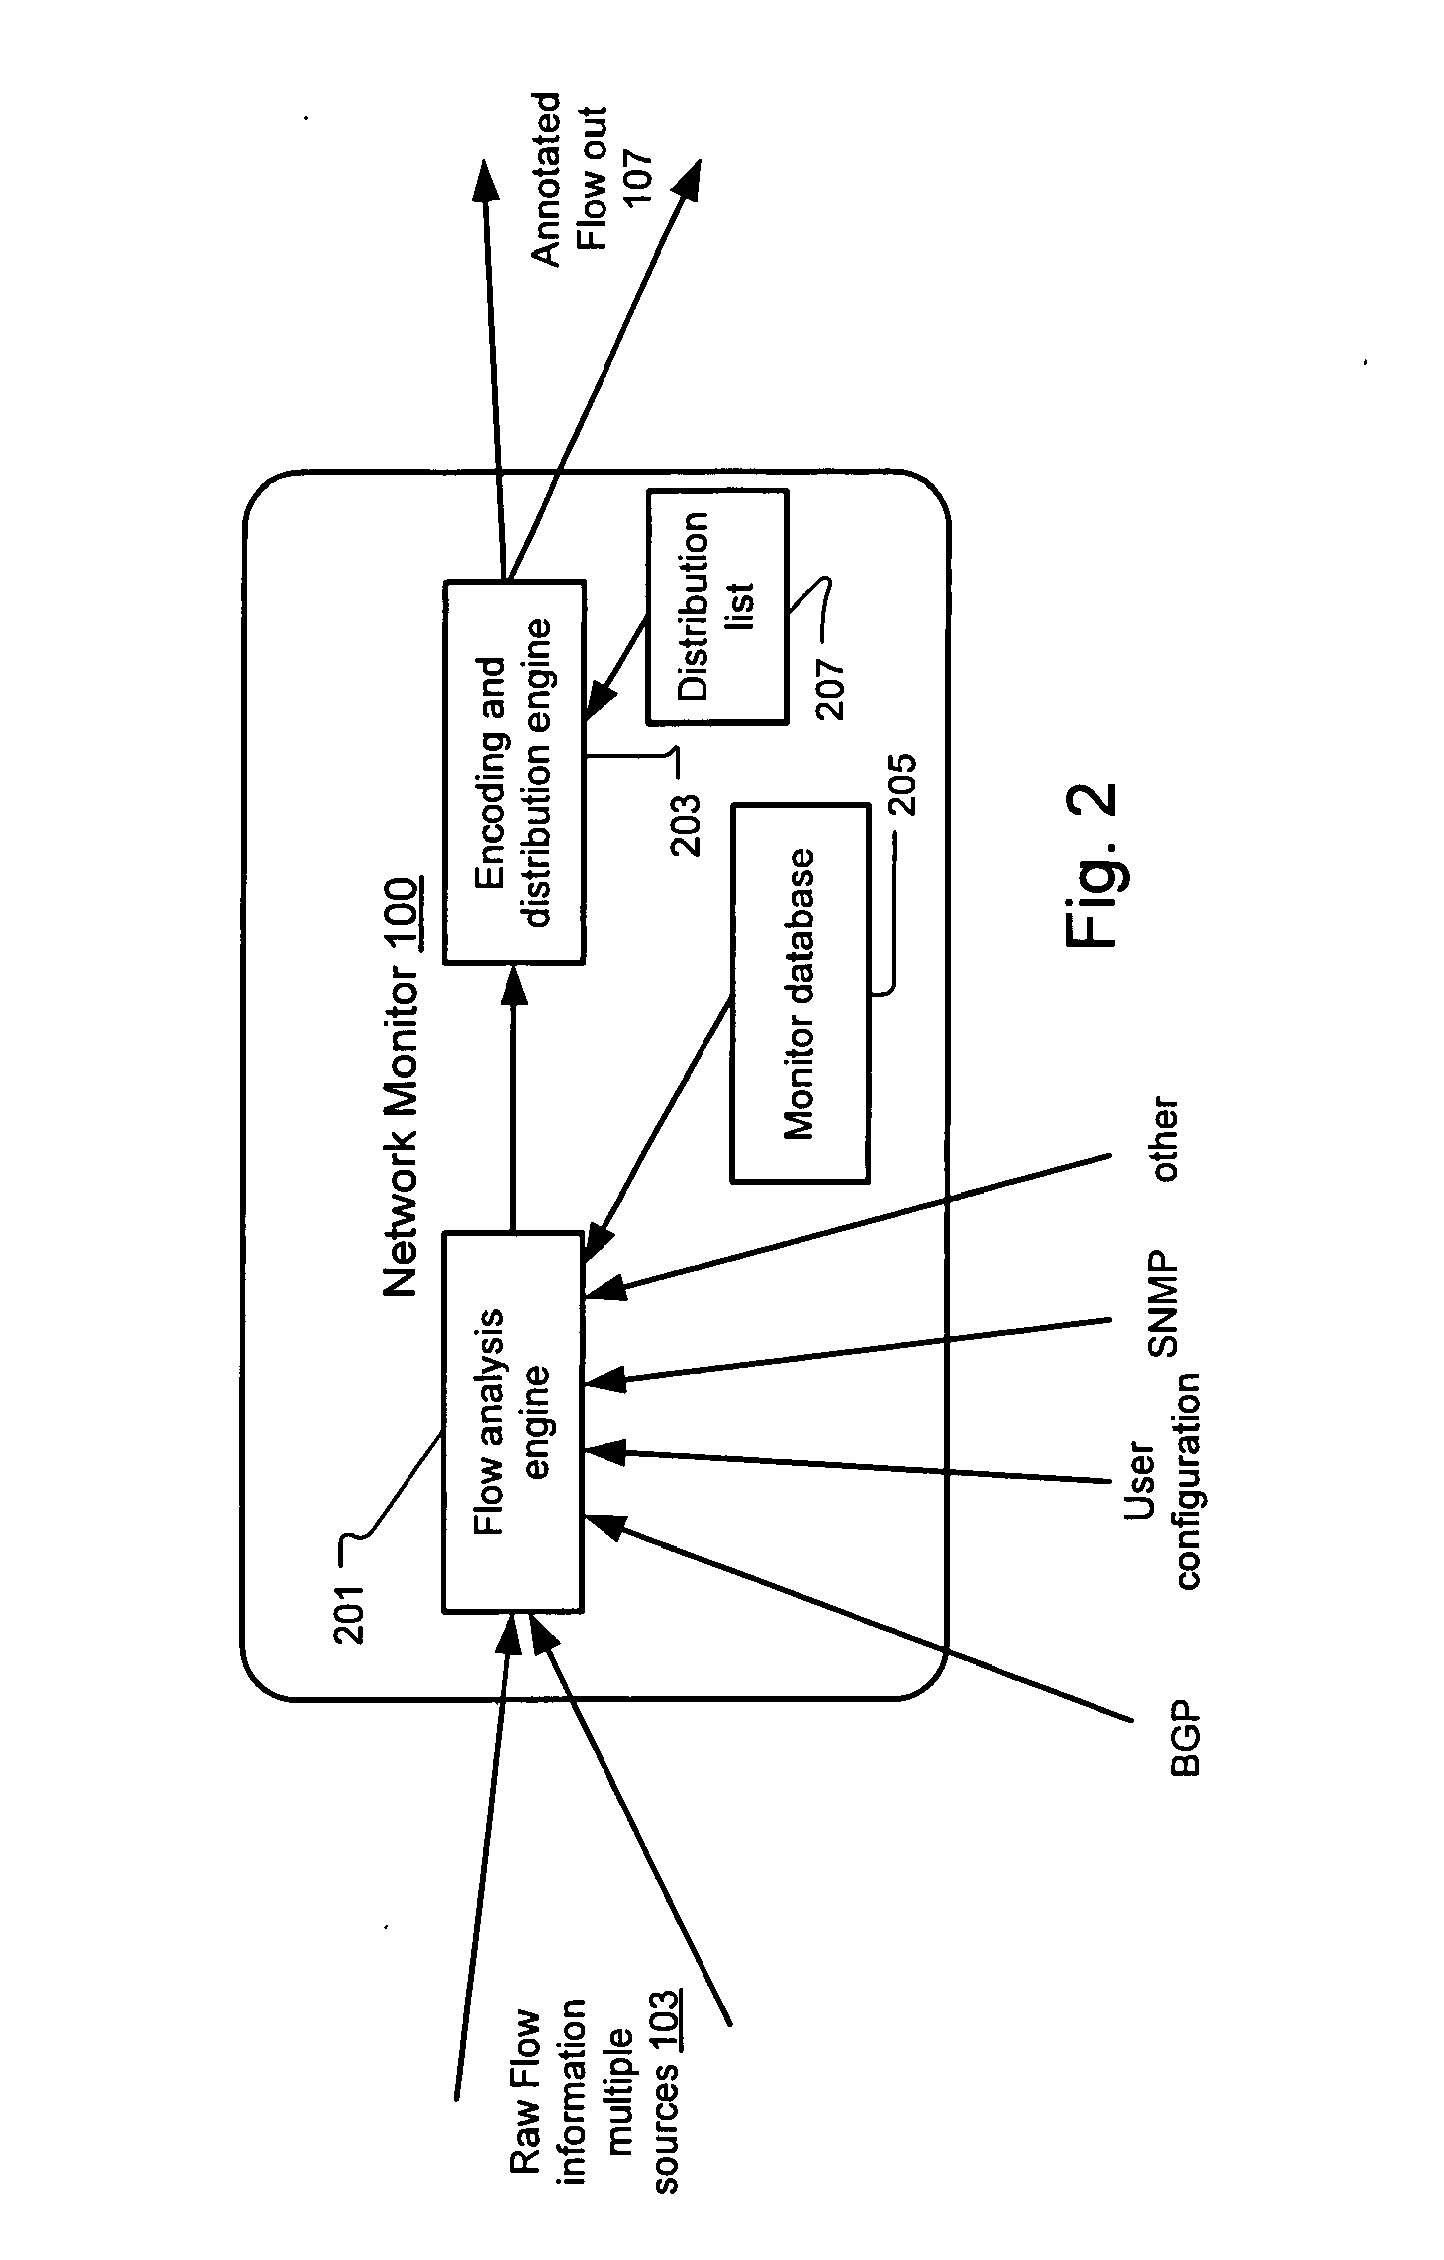 Method and system for annotating network flow information